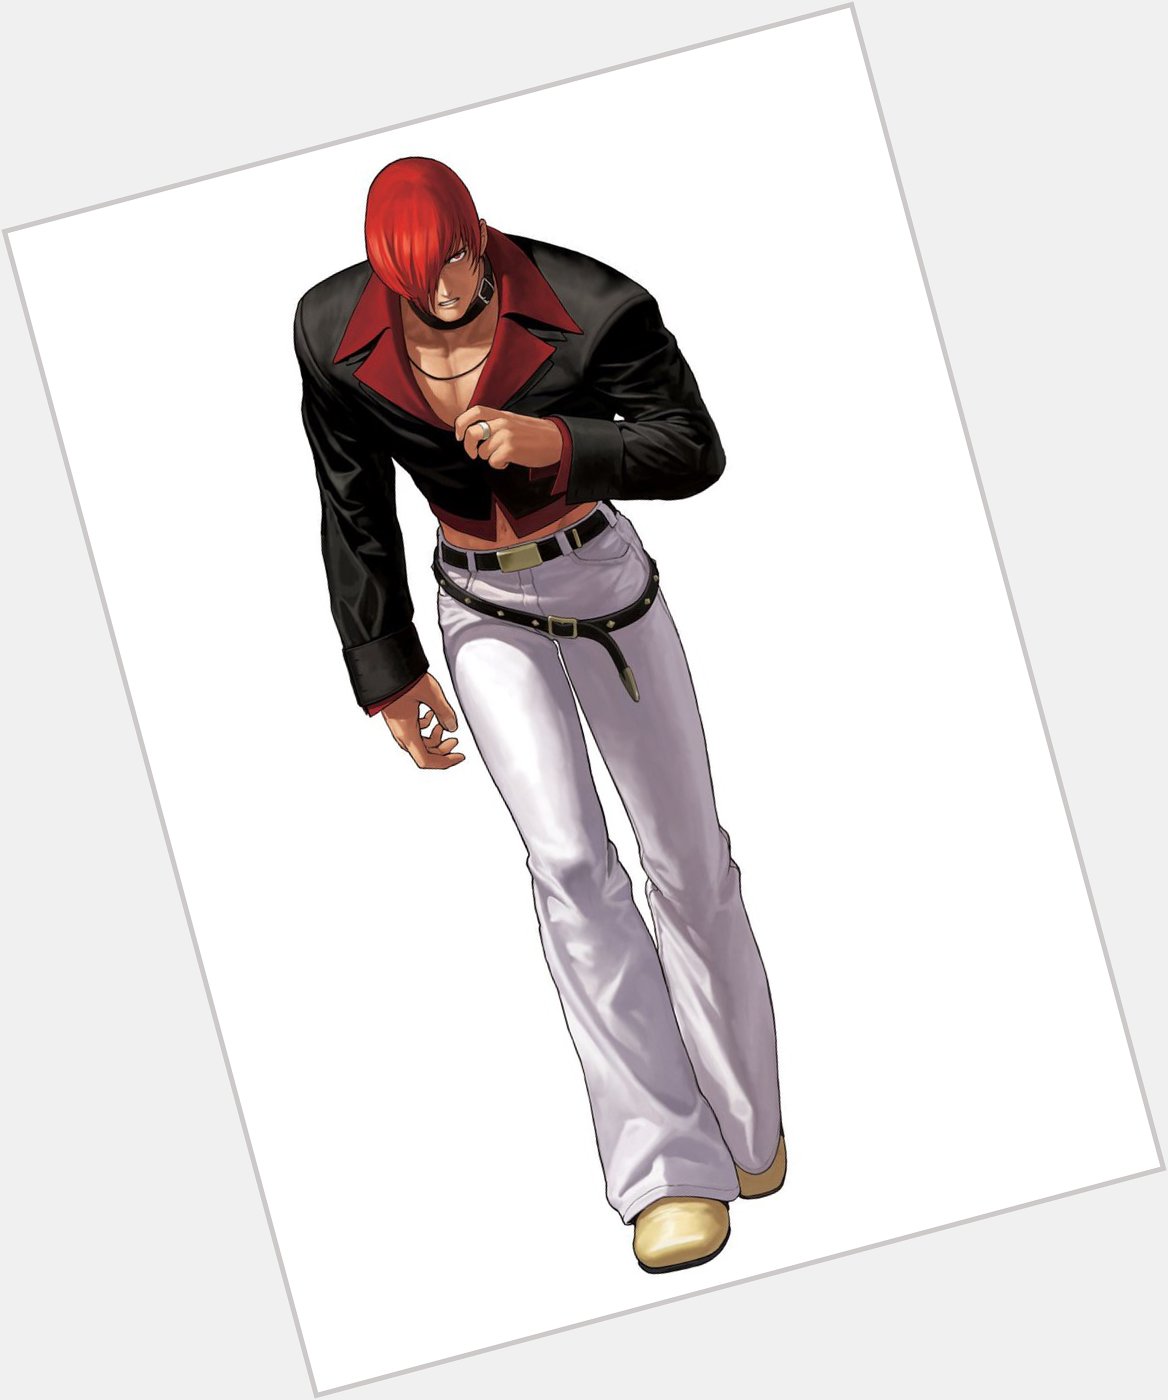 Happy early Birthday Iori Yagami ( March 25 )     the best character in King of Fighters history. 